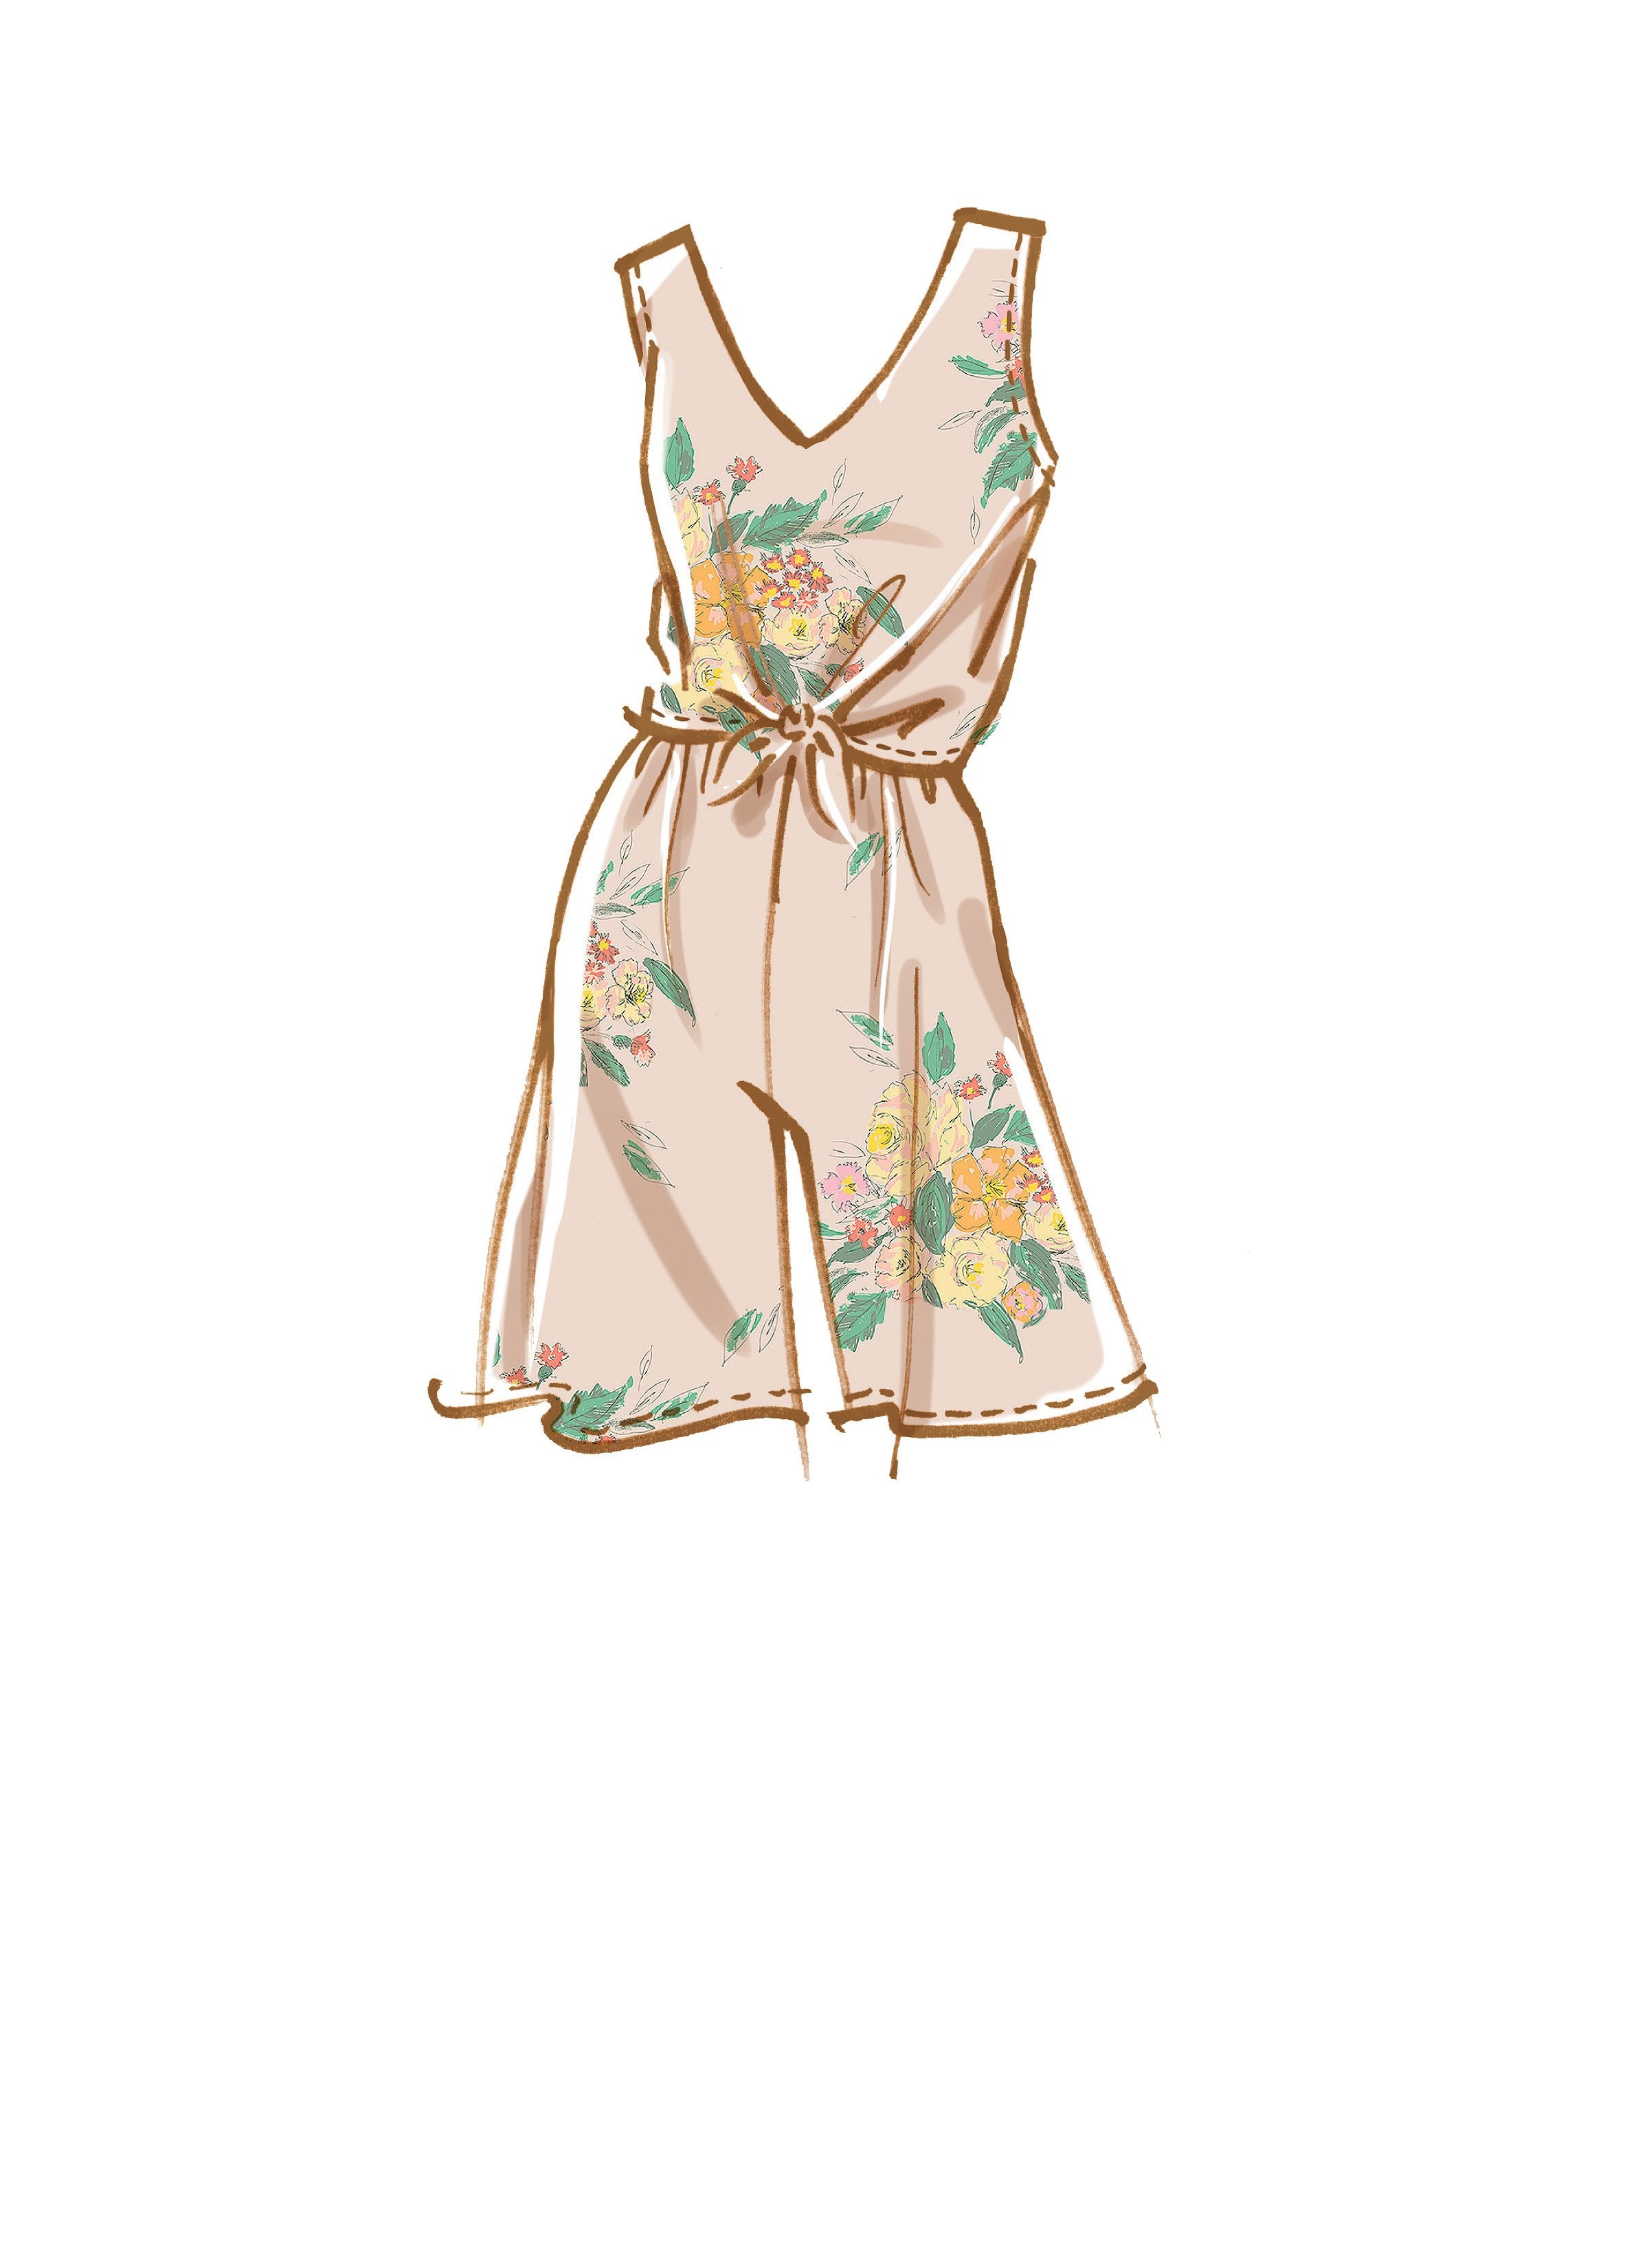 McCall's 8218 Misses' Romper, Jumpsuits and Sash sewing pattern from Jaycotts Sewing Supplies